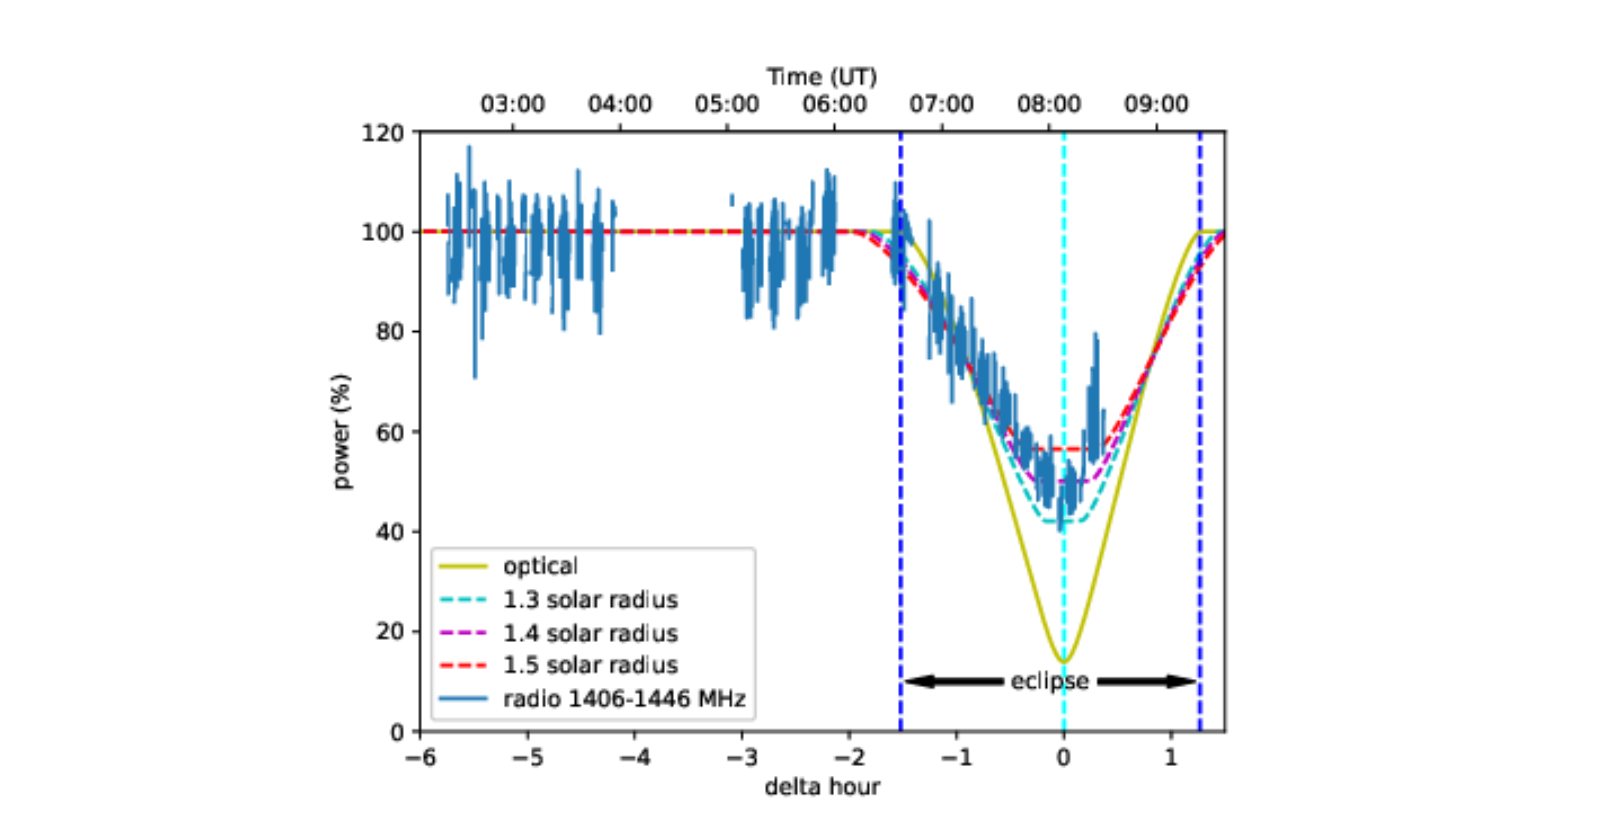 Solar eclipse observations with SPIDER 300A radio telescope in Hong Kong in the 21cm radio frequency band